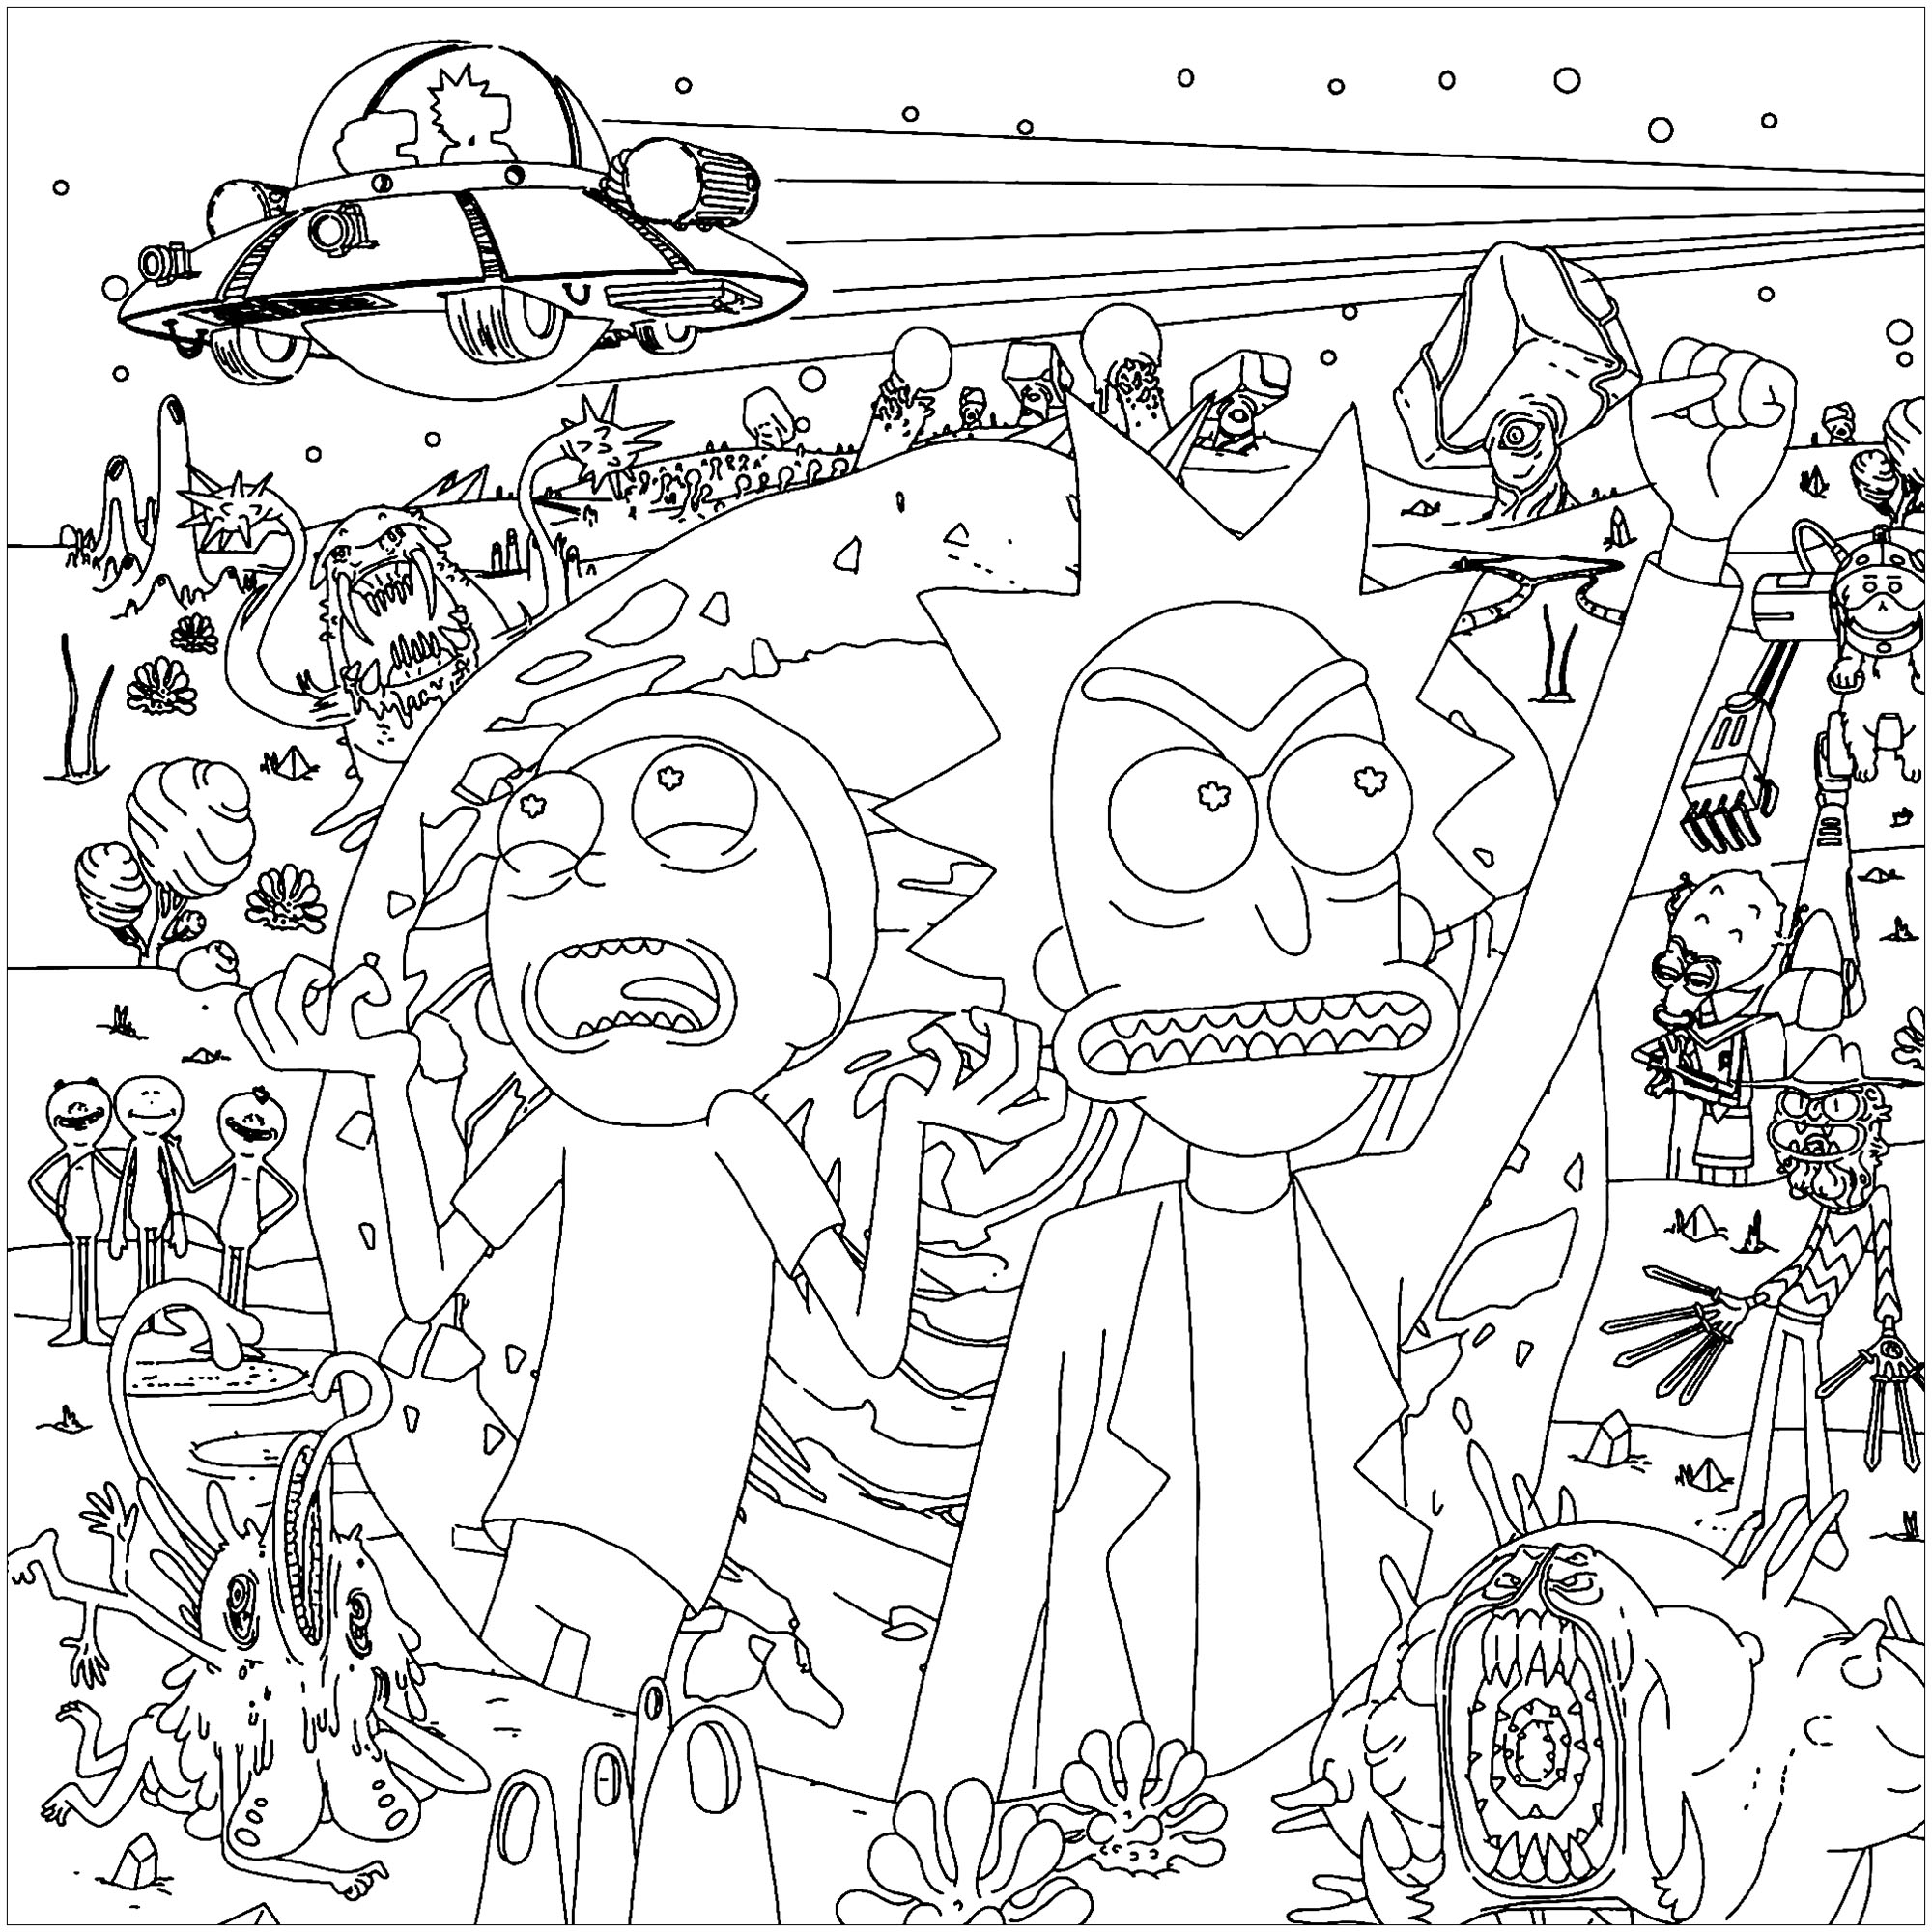 rick-and-morty-coloring-pages-best-coloring-pages-for-kids